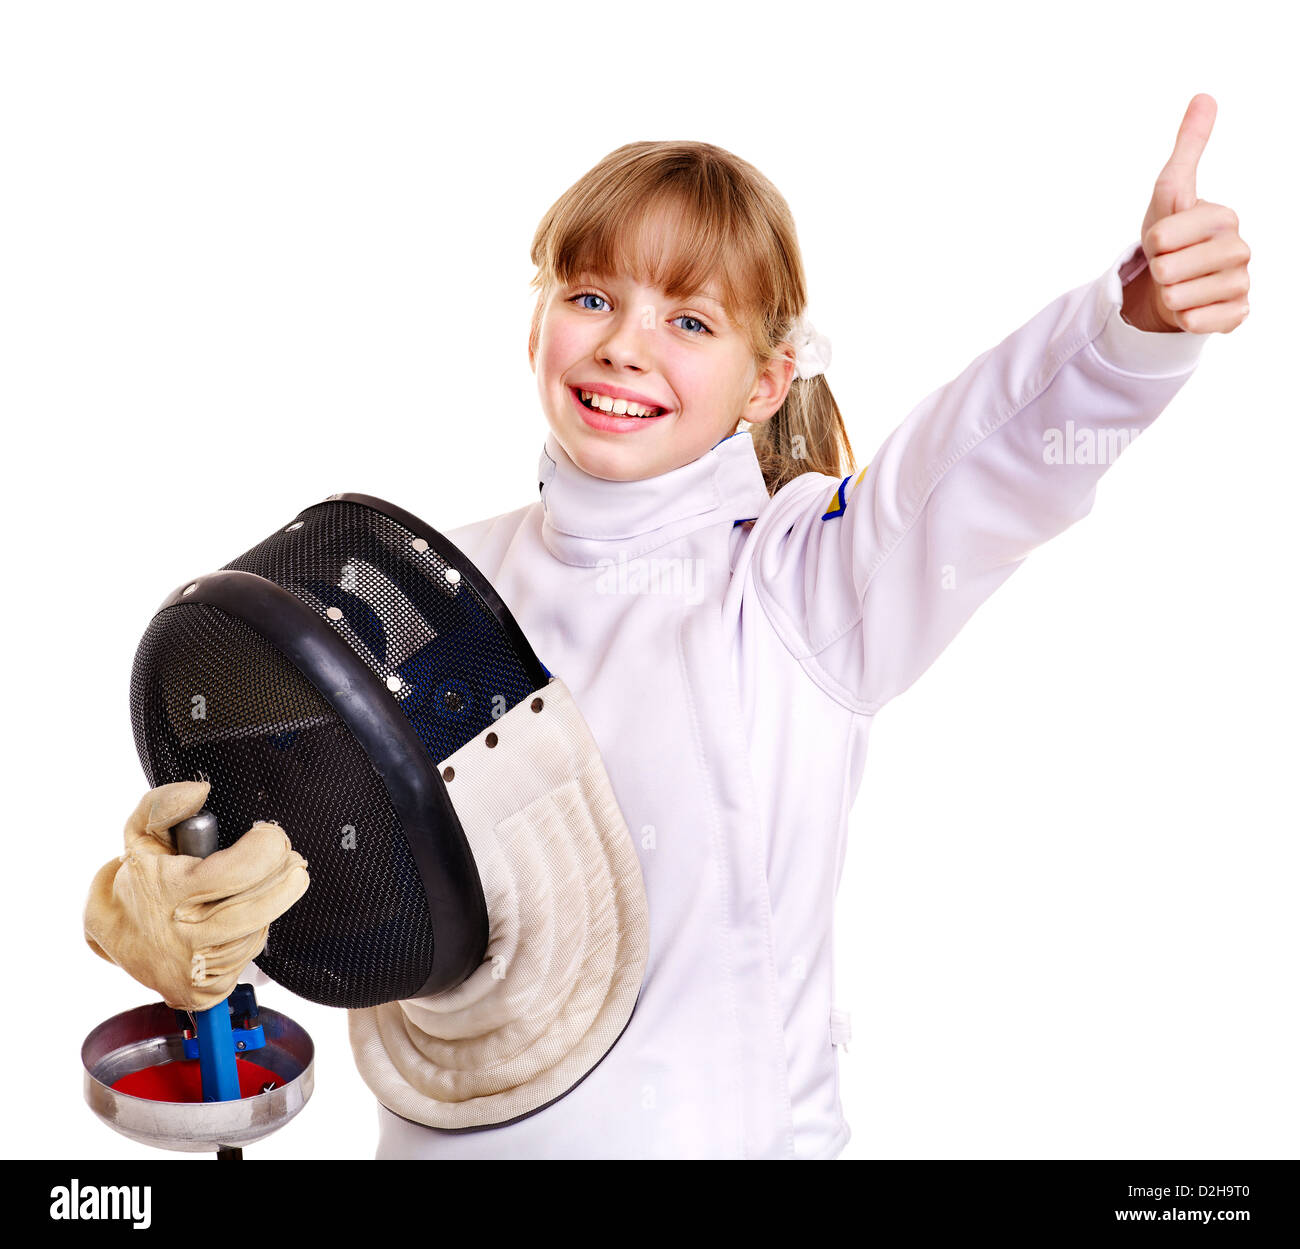 Child in fencing costume holding epee thumb up. Stock Photo